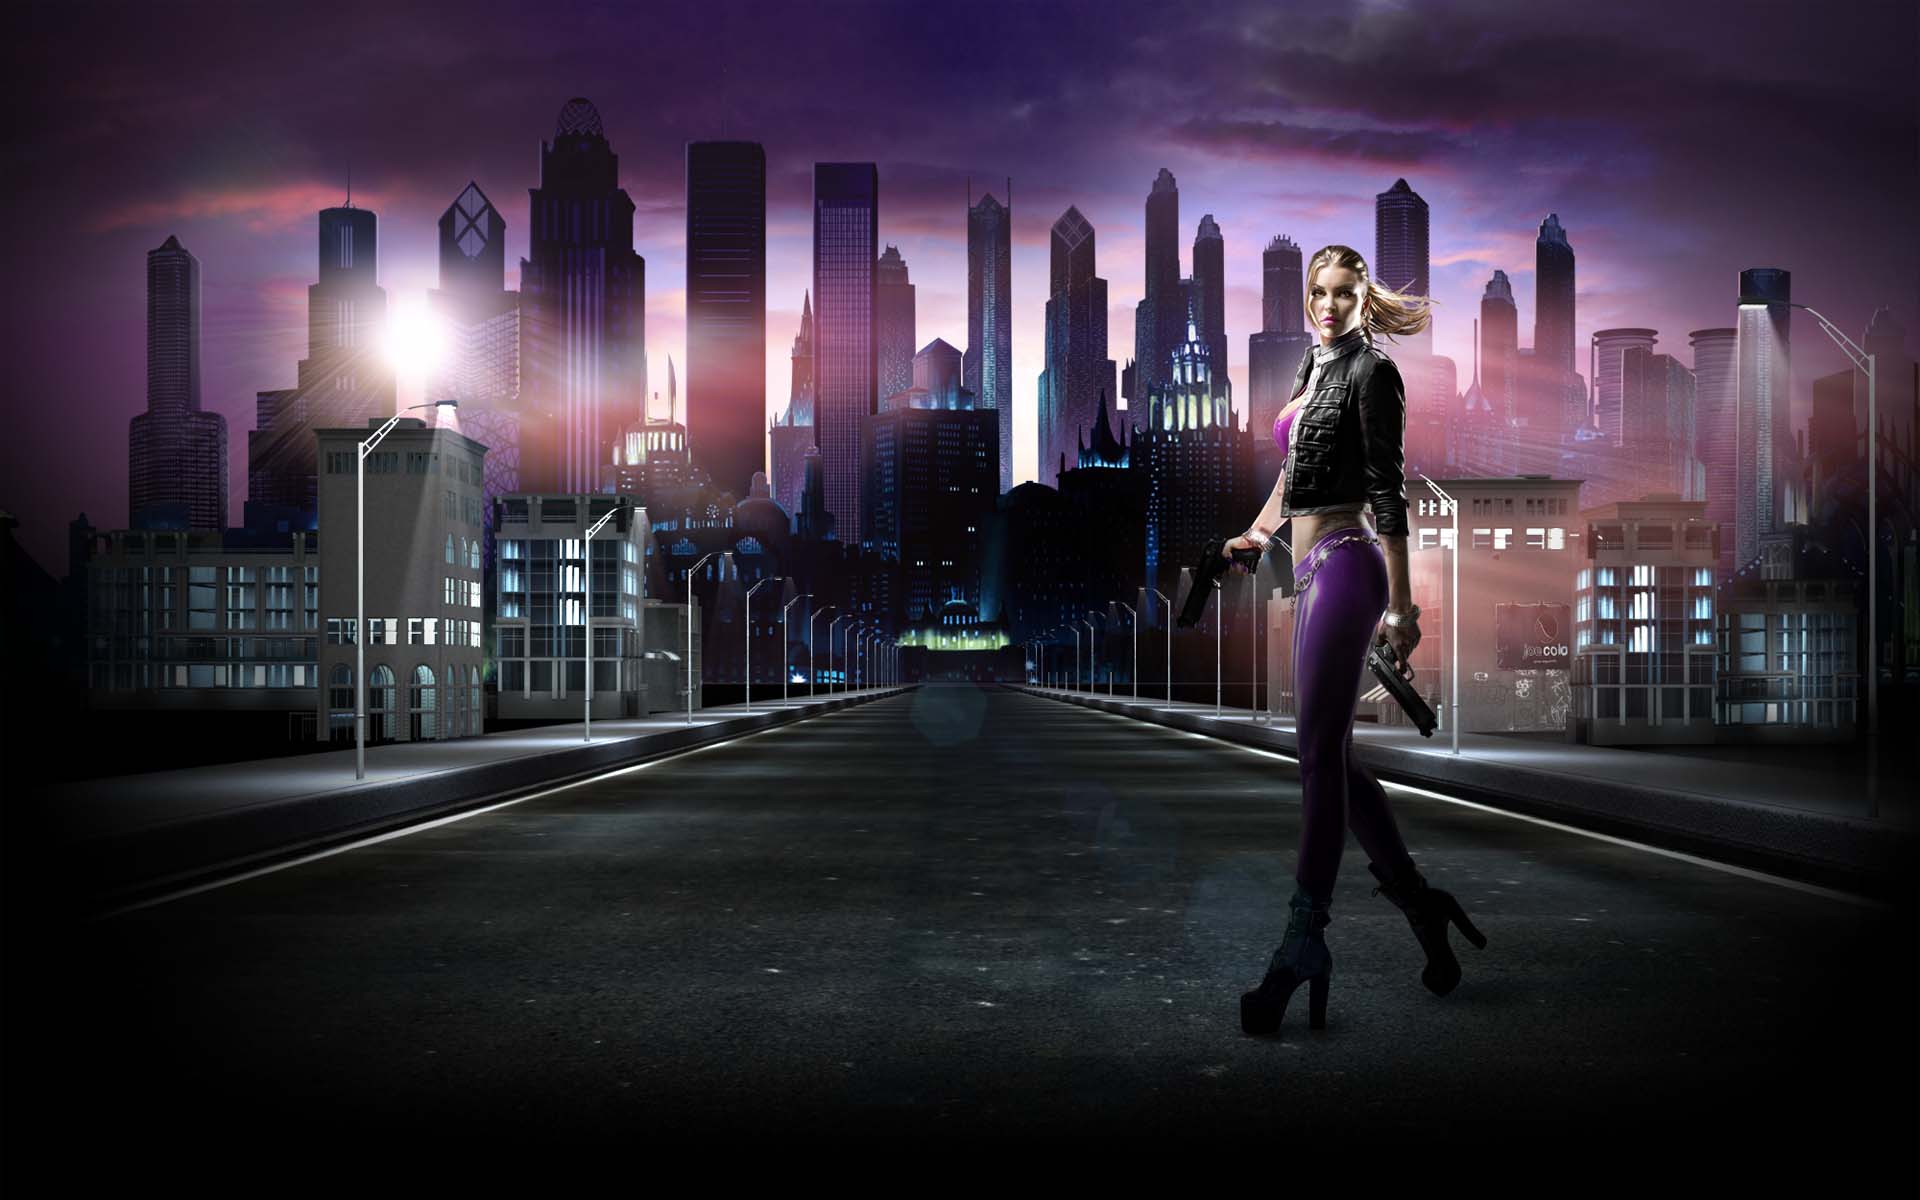 Saints Row The Third Hd Wallpapers Wallpapers Games 1920x1200PX